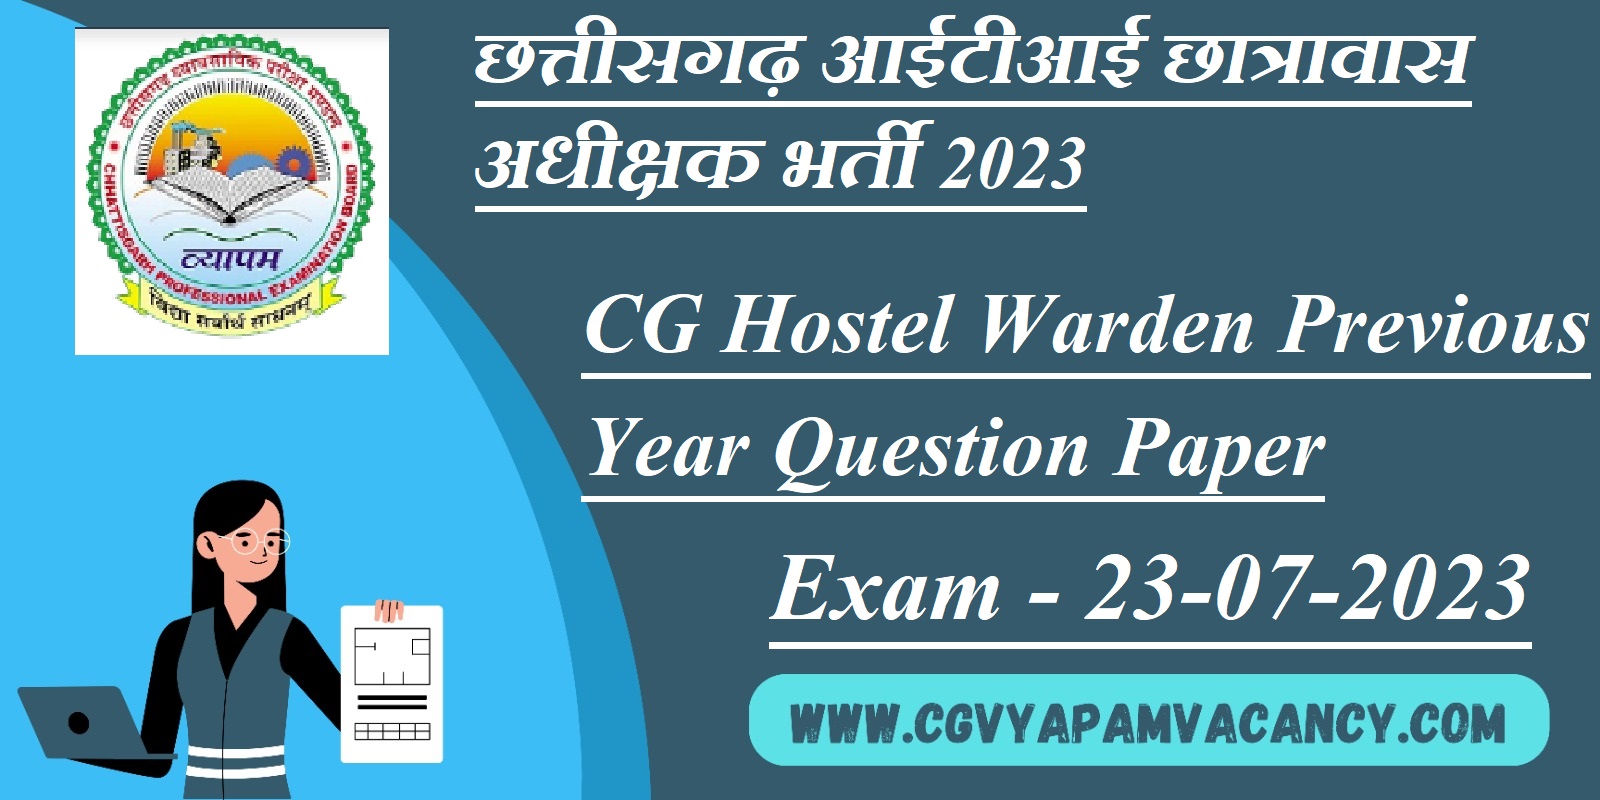 CG Hostel Warden Previous Year Question Paper Download pdf in hindi